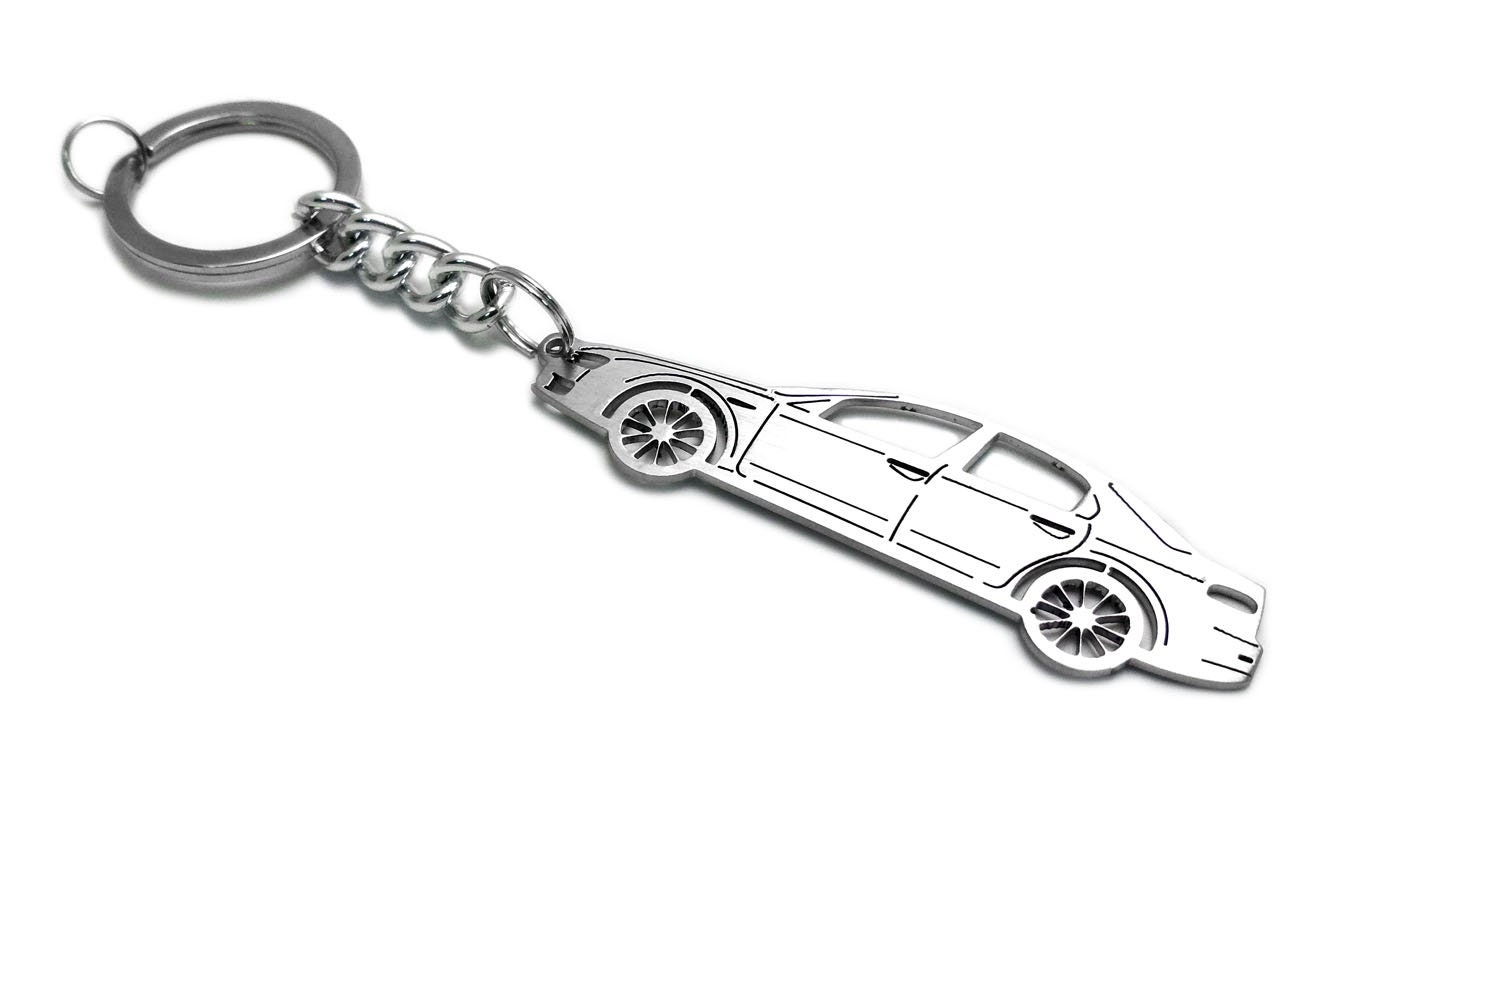 ALFA ROMEO keyring keychain Brera Spider Mito Giulia Giulietta 147 166 159  | quality crafted stainless steel cover kits & car accessories